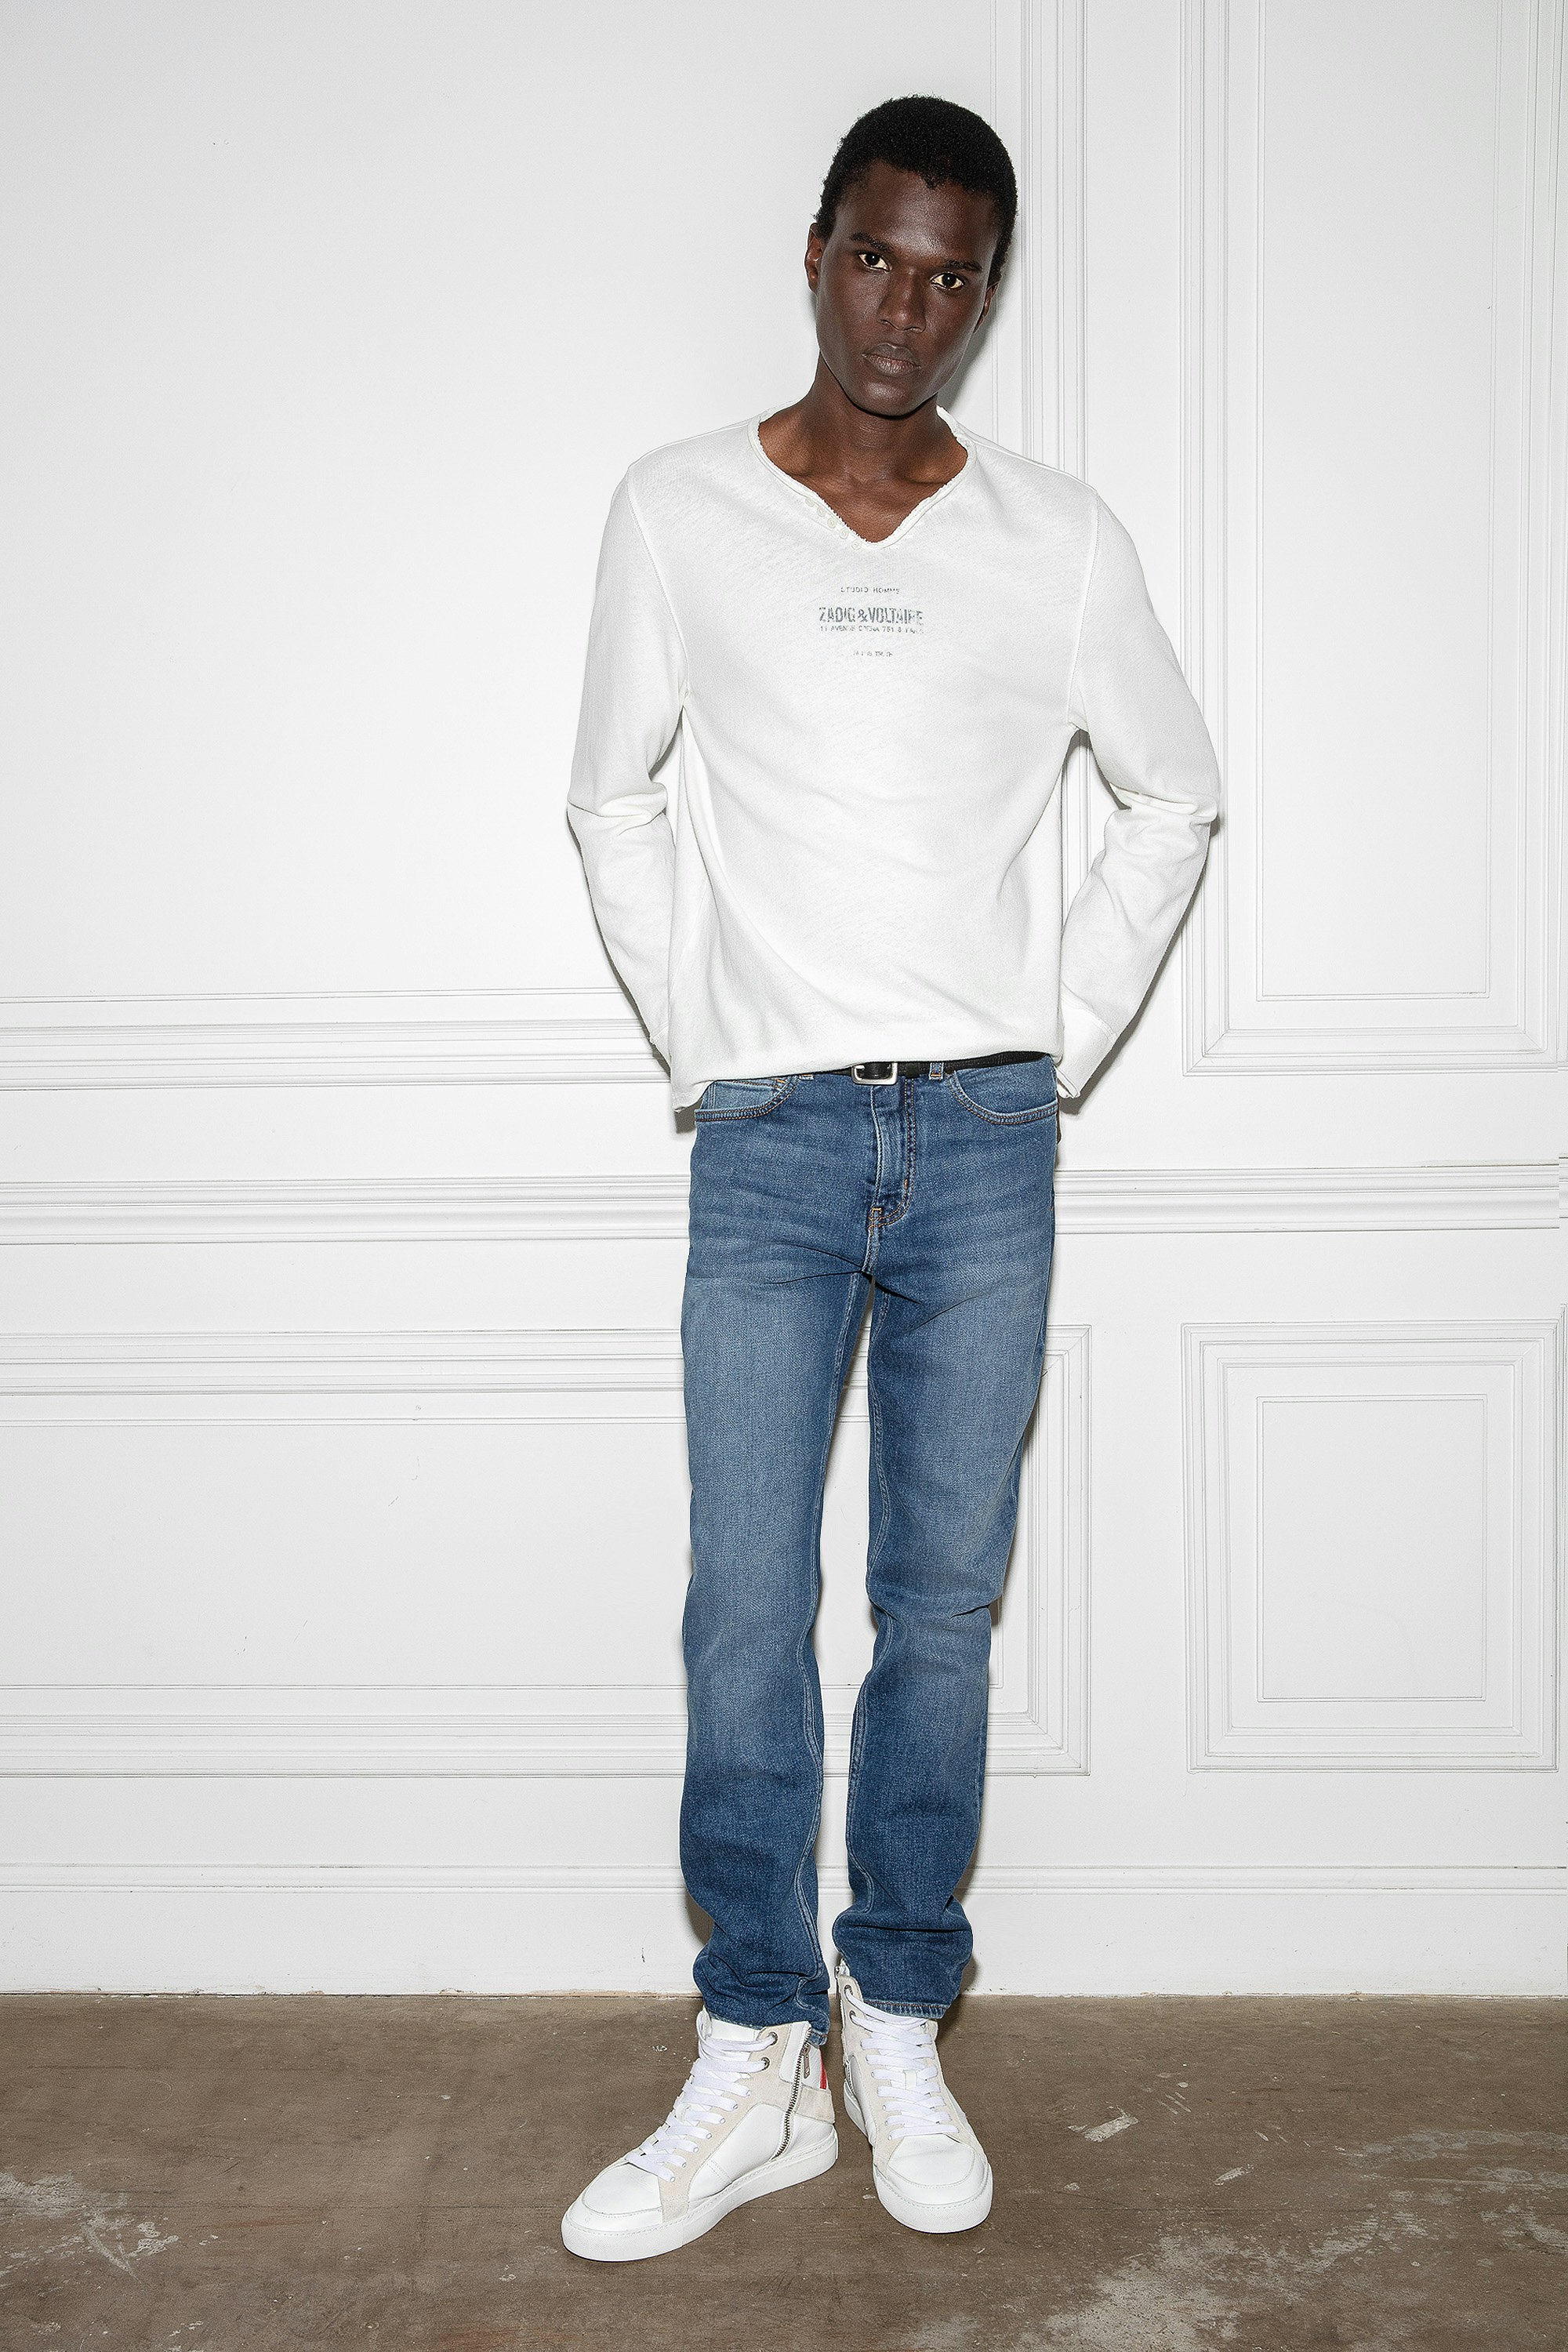 Monastir Henley T-shirt - Men's white washed linen T-shirt with Henley neckline and printed Studio Homme insignia.